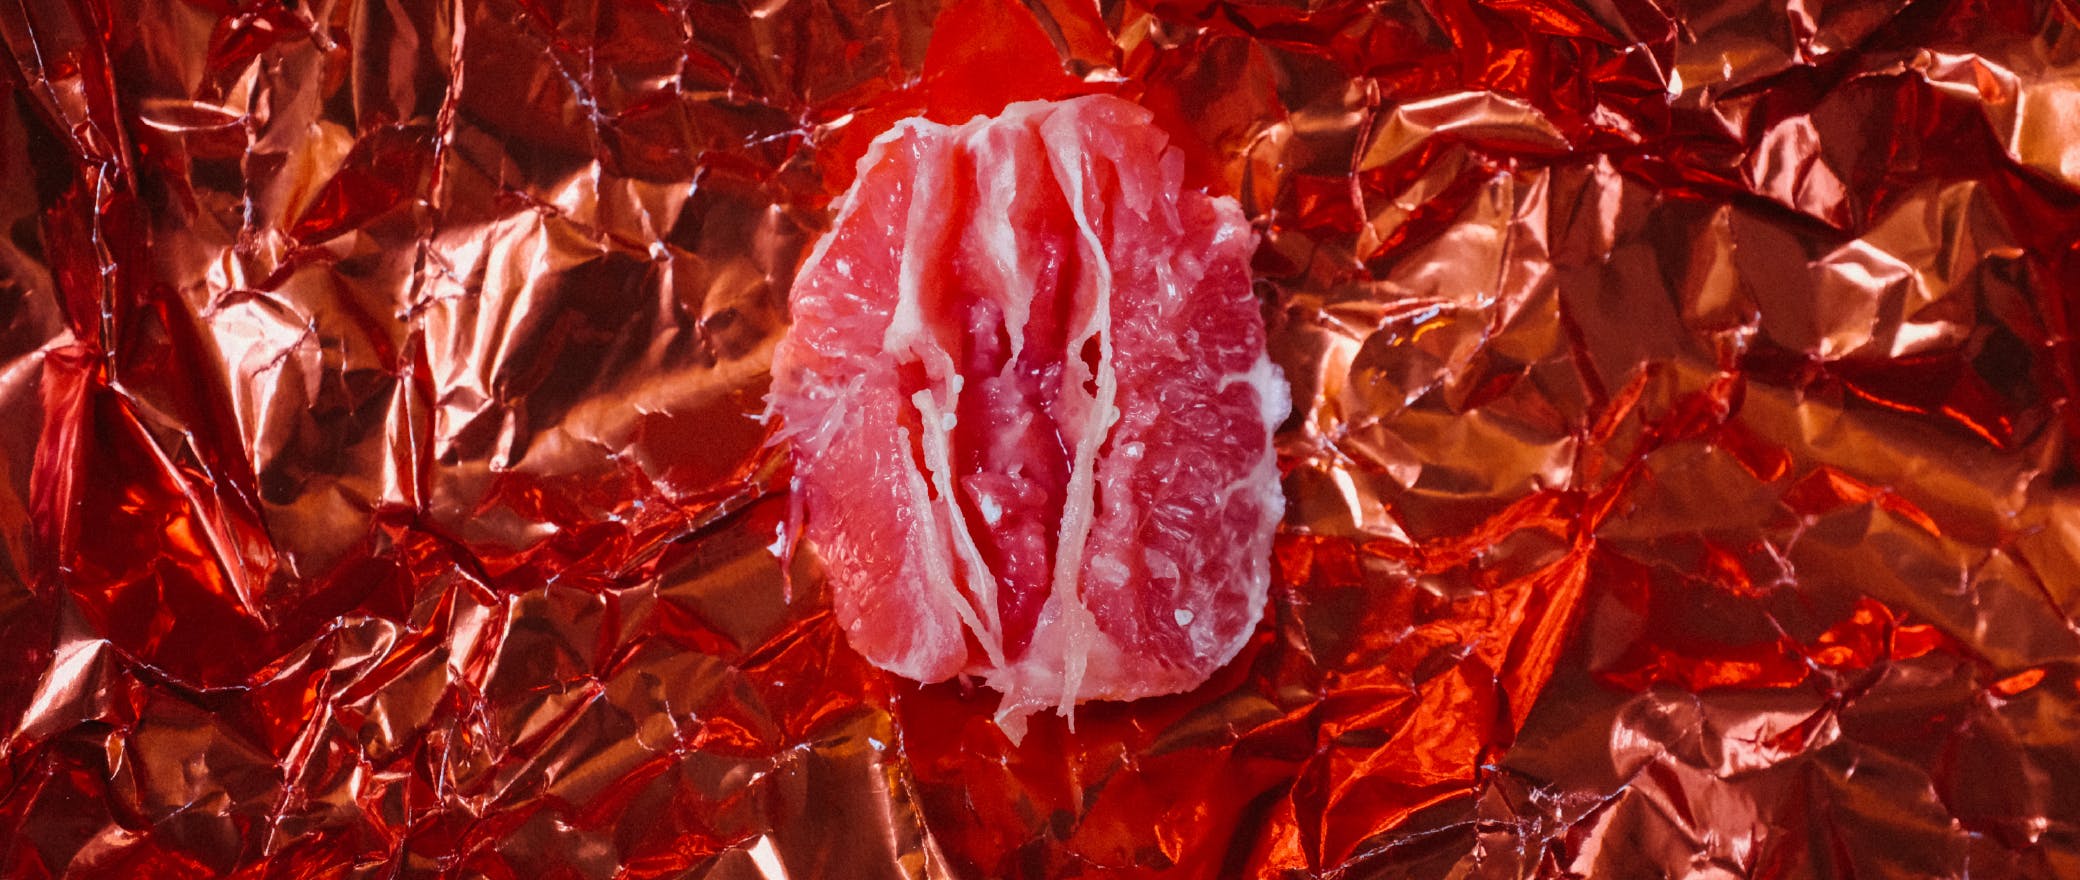 Crumbled red foil paper as the background with a slice of grapefruit kept on it